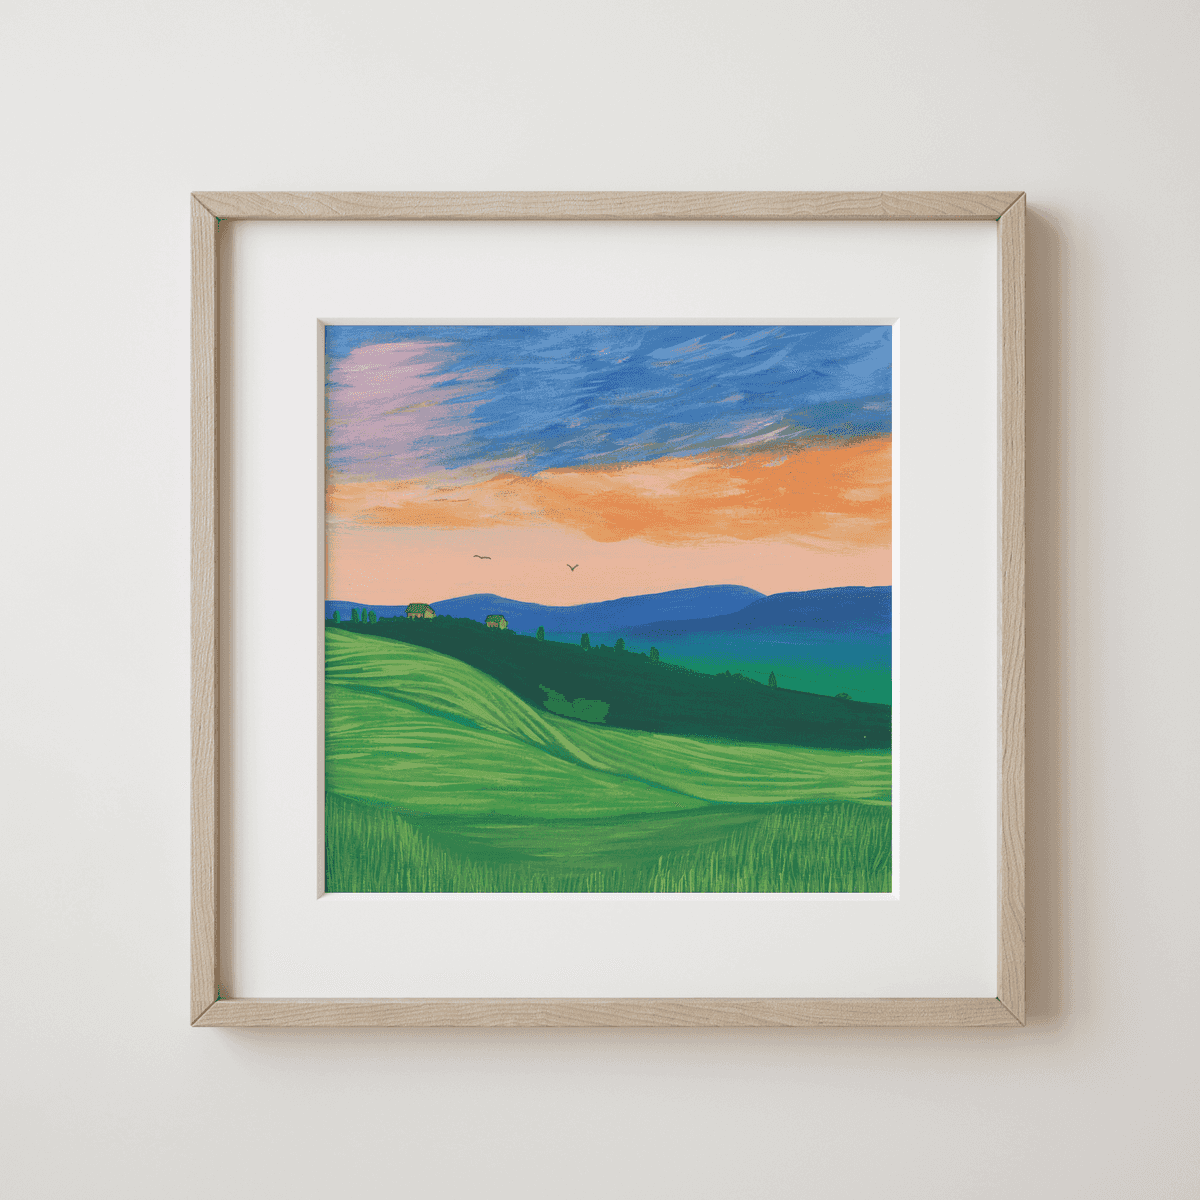 Eider Soundscape - Sunset Bliss over Rolling Hills and Distant Mountains Fine Art Print - earth.fm